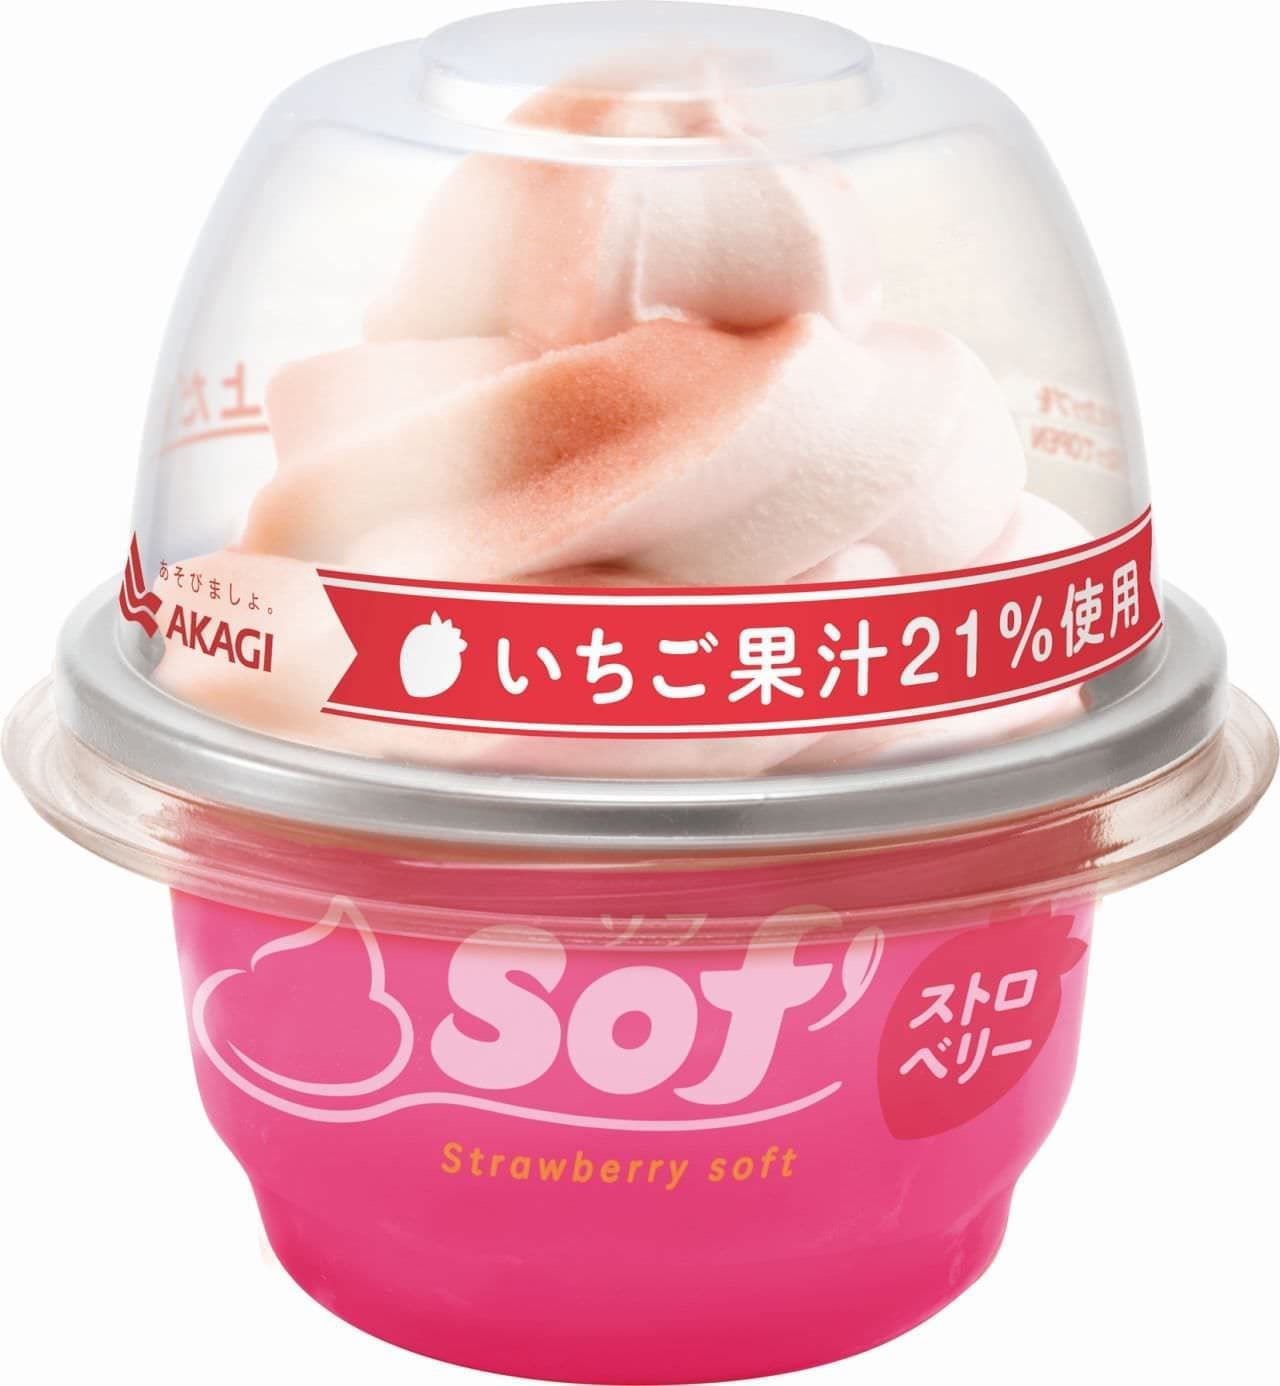 From the "Sof'" series, a new flavor "Strawberry"